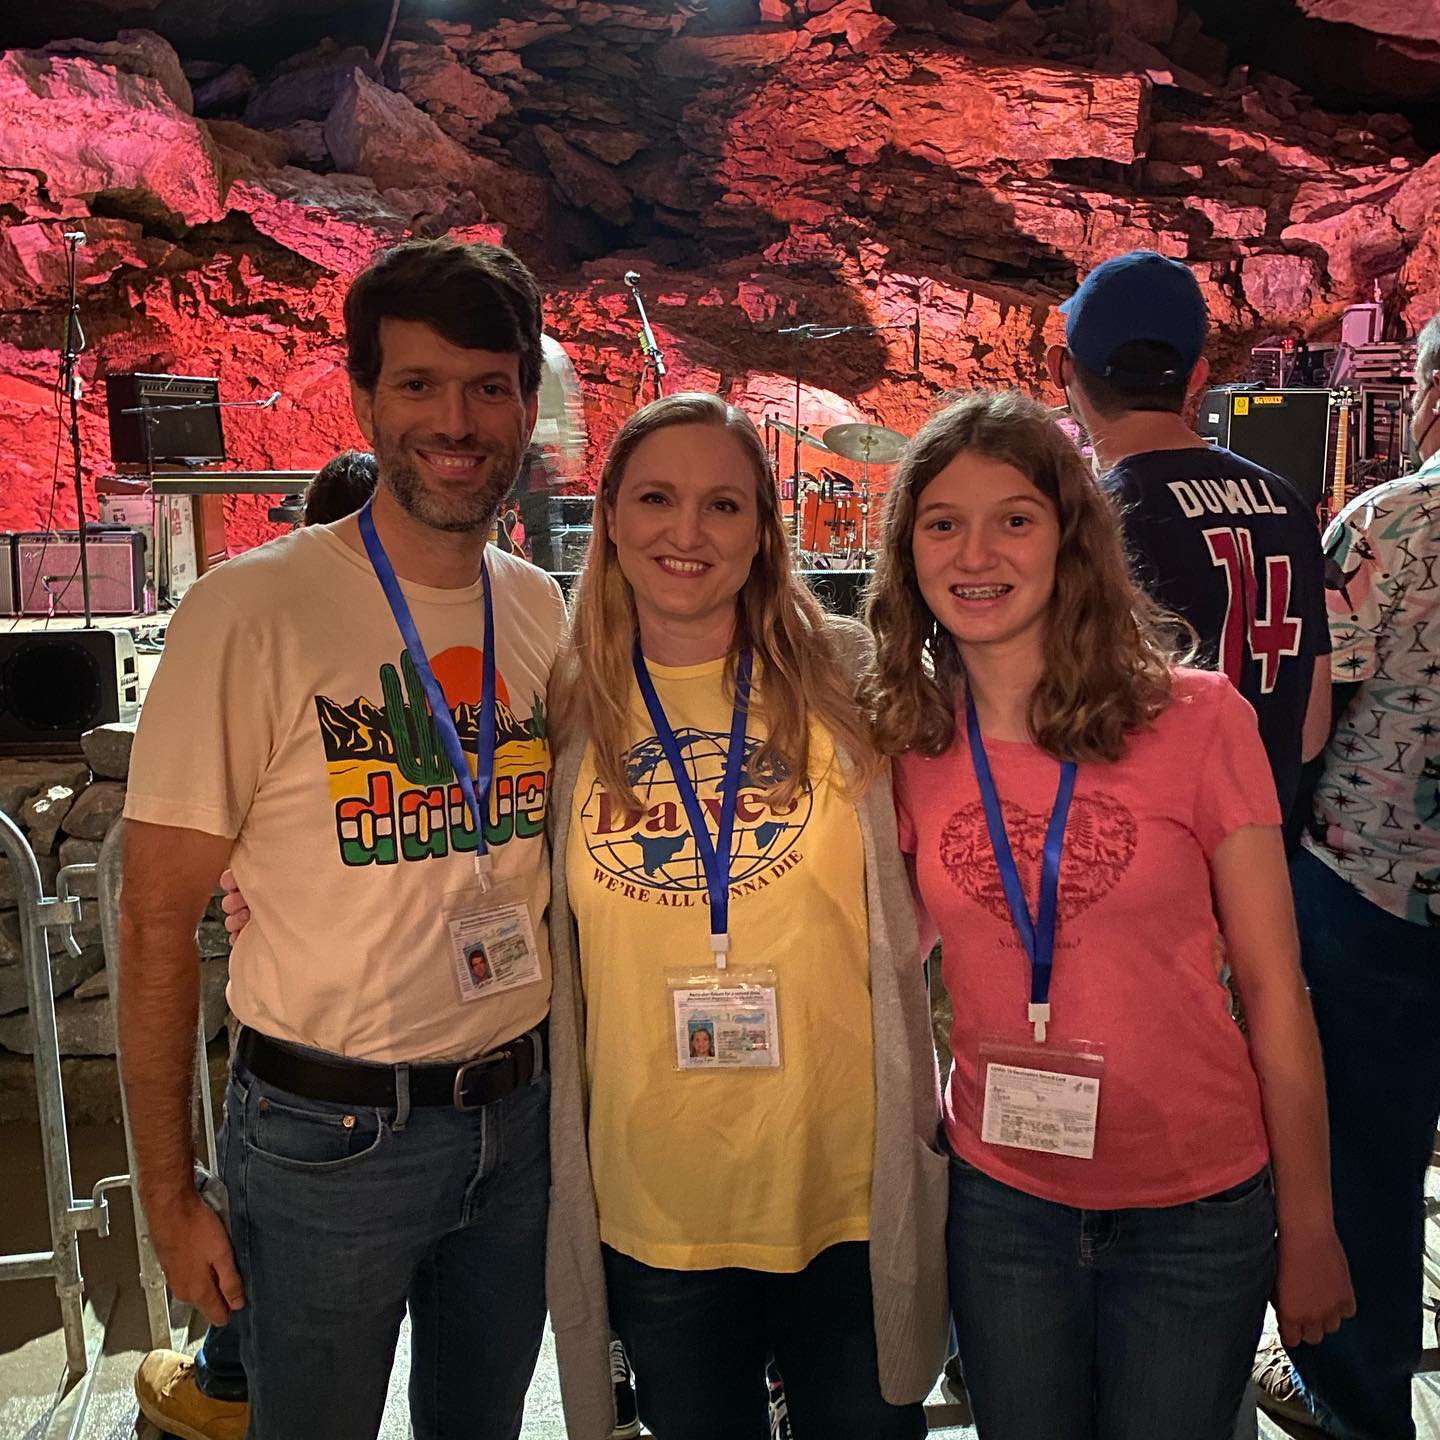 Dawes at the Caverns! Olivia is very claustrophobic and is standing near the mouth of the cave (after taking the picture), but Sara and I are all the way down by the stage. My 10th time to see Dawes live, and our second time in two weeks. @dawestheband